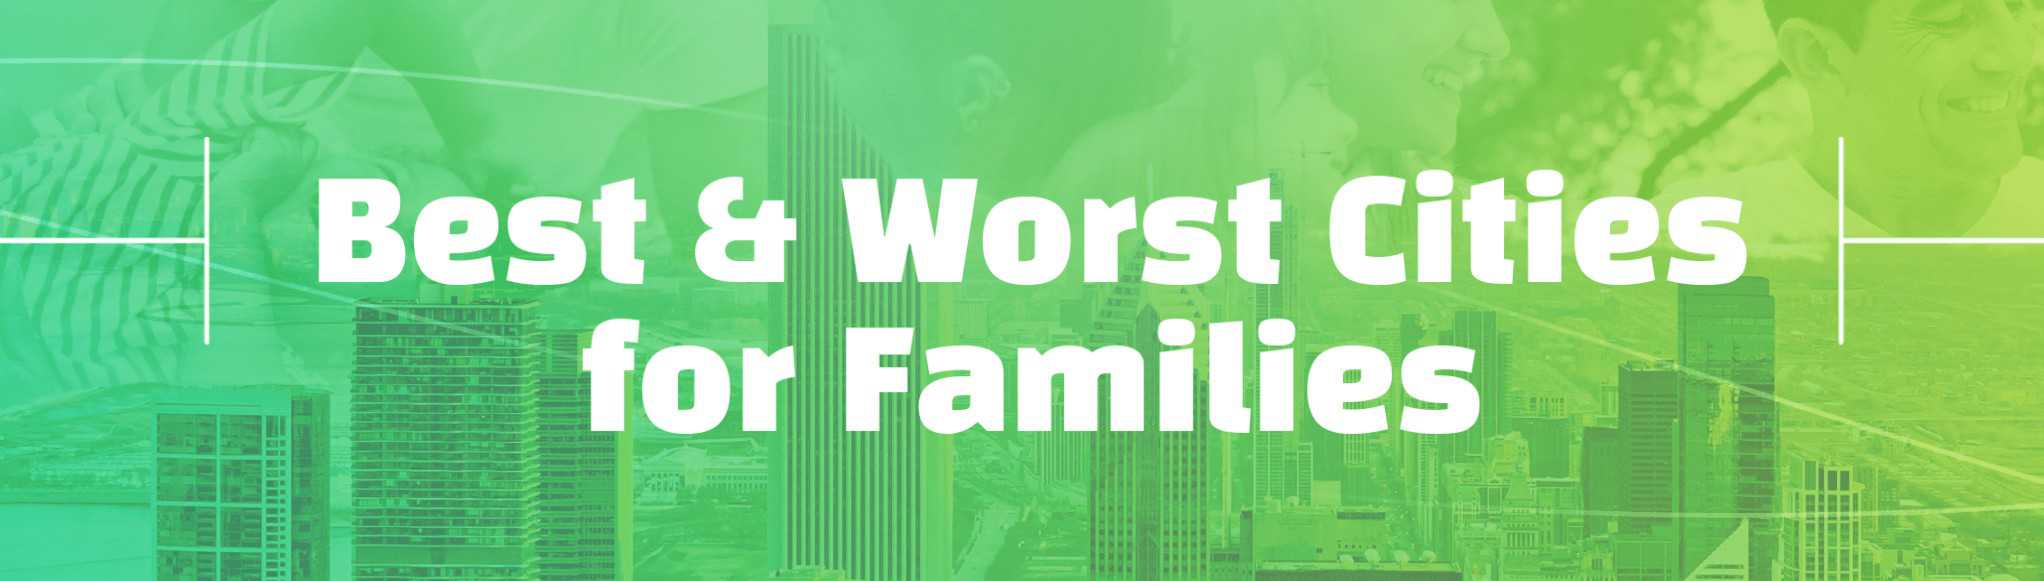 Best & Worst Cities for Families Featured Image